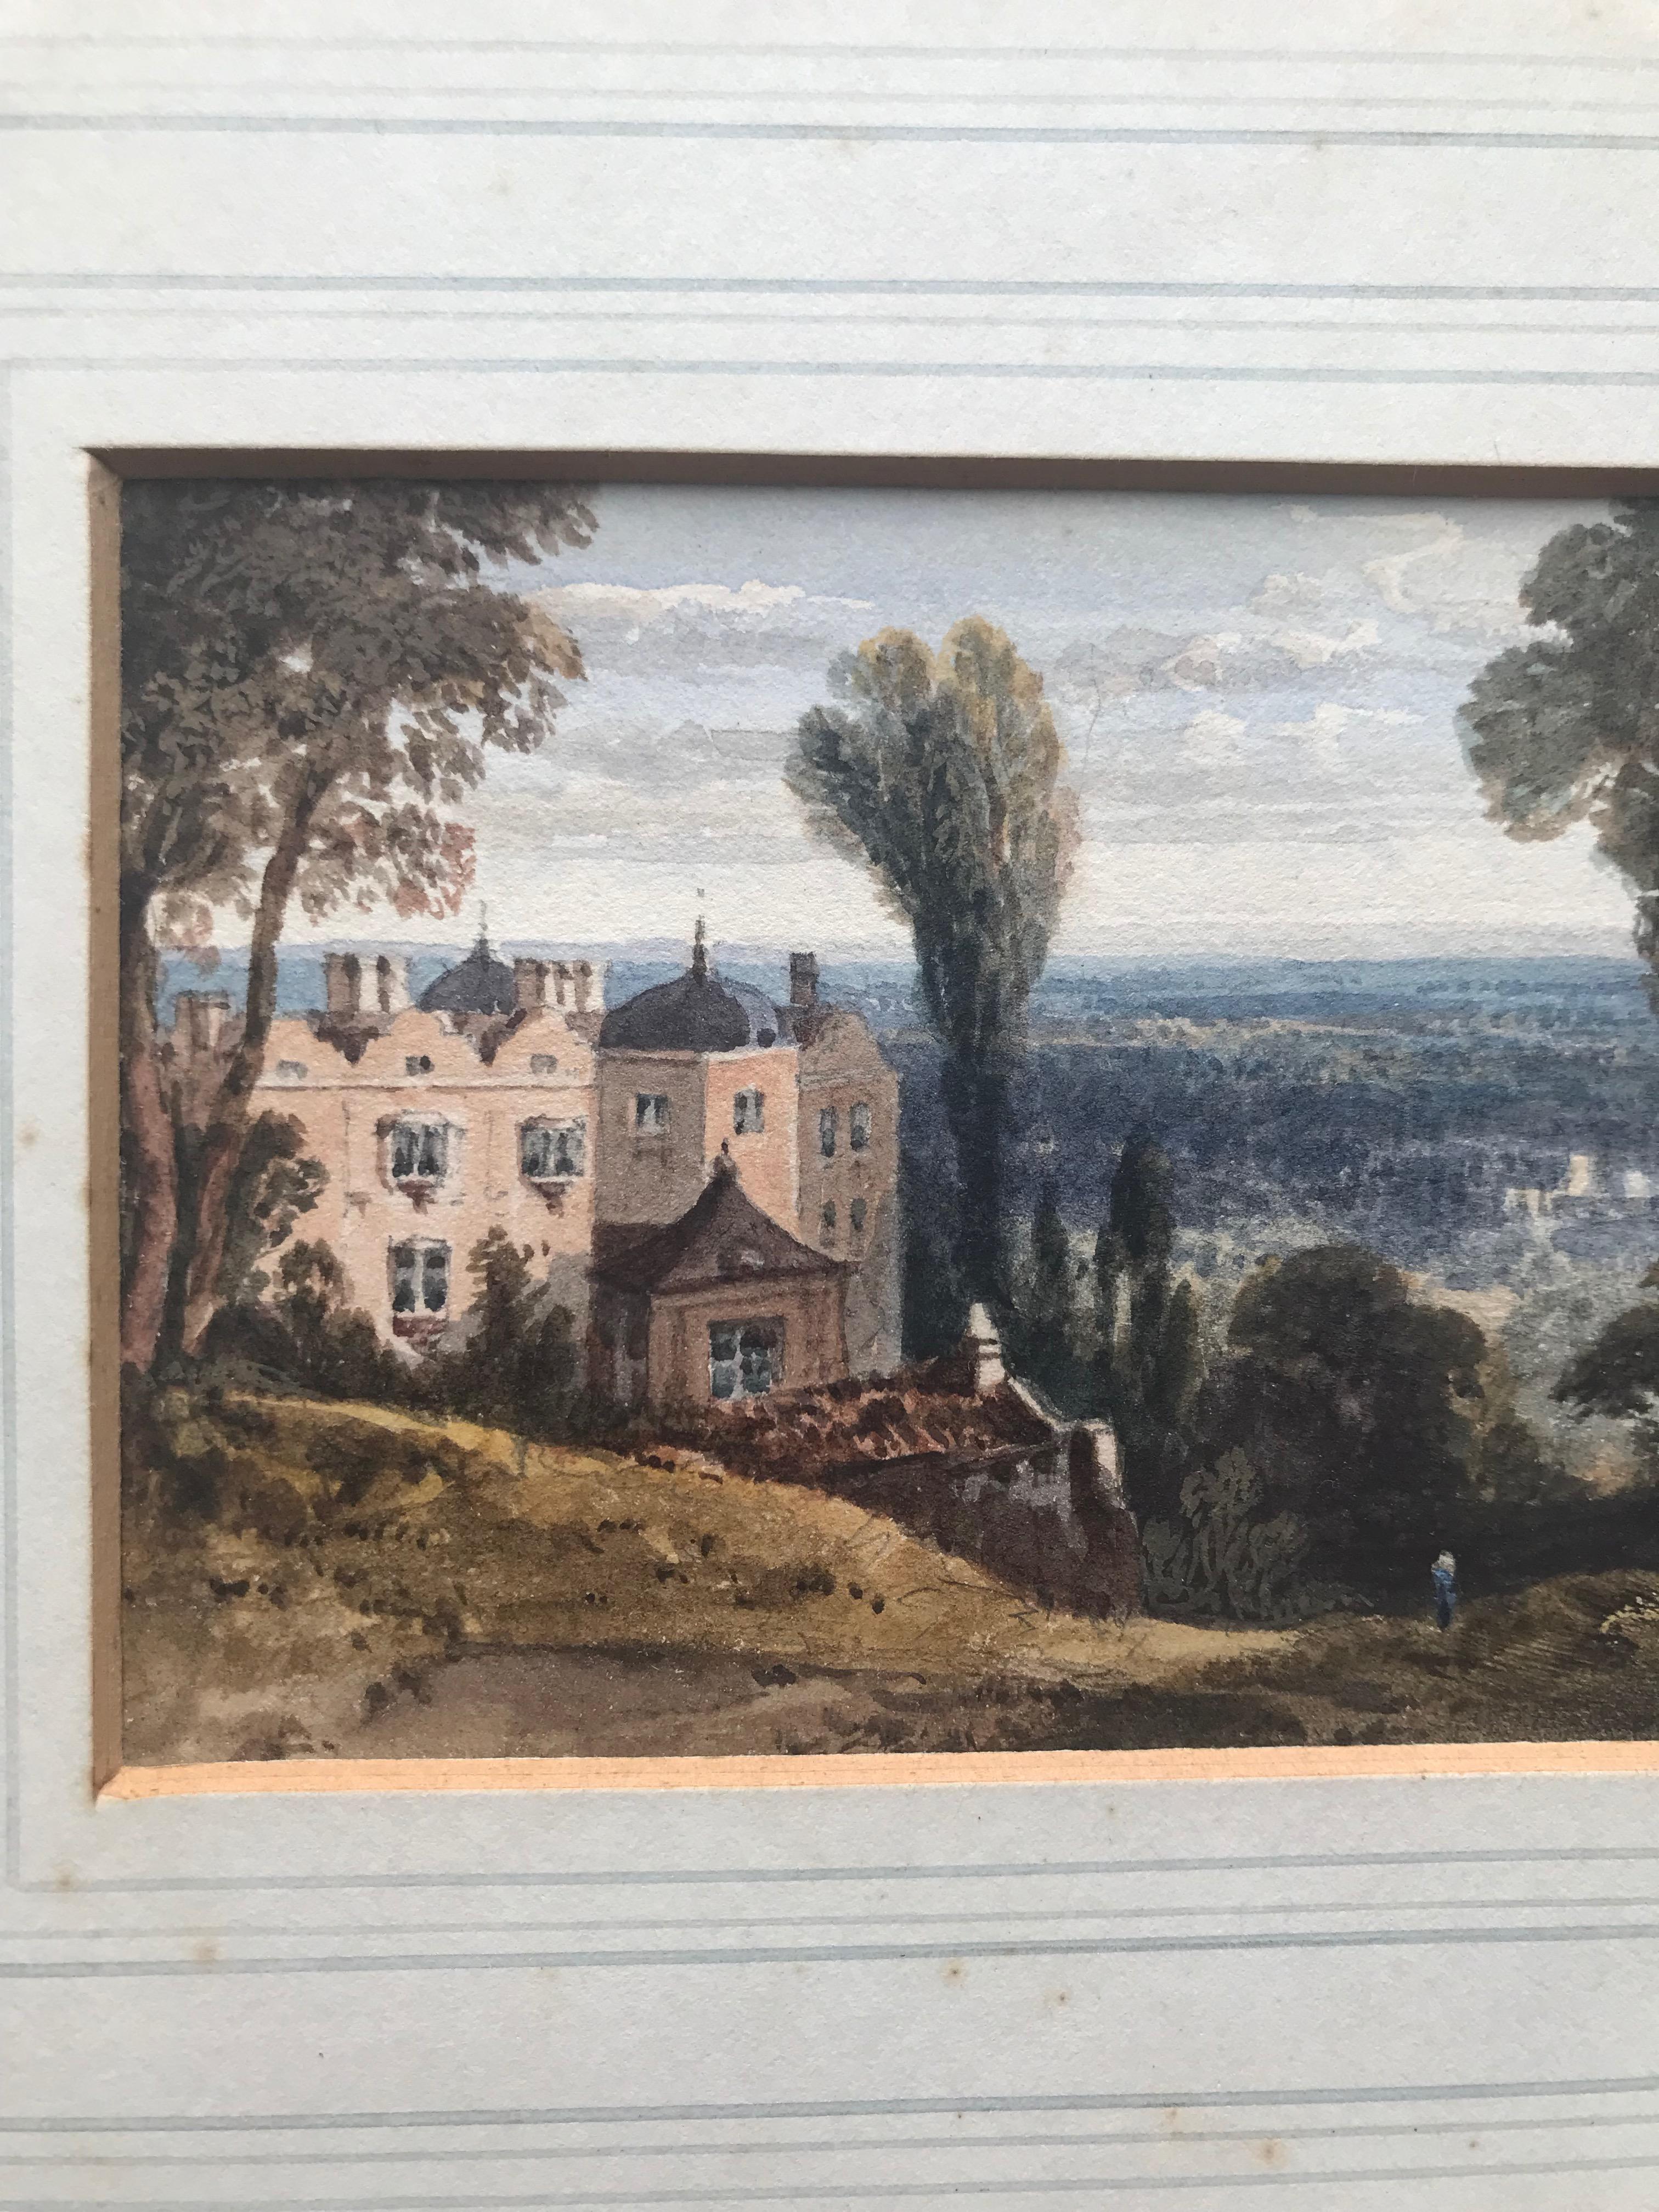 William Crouch, View of a country house, Yalding Downs, Kent 4